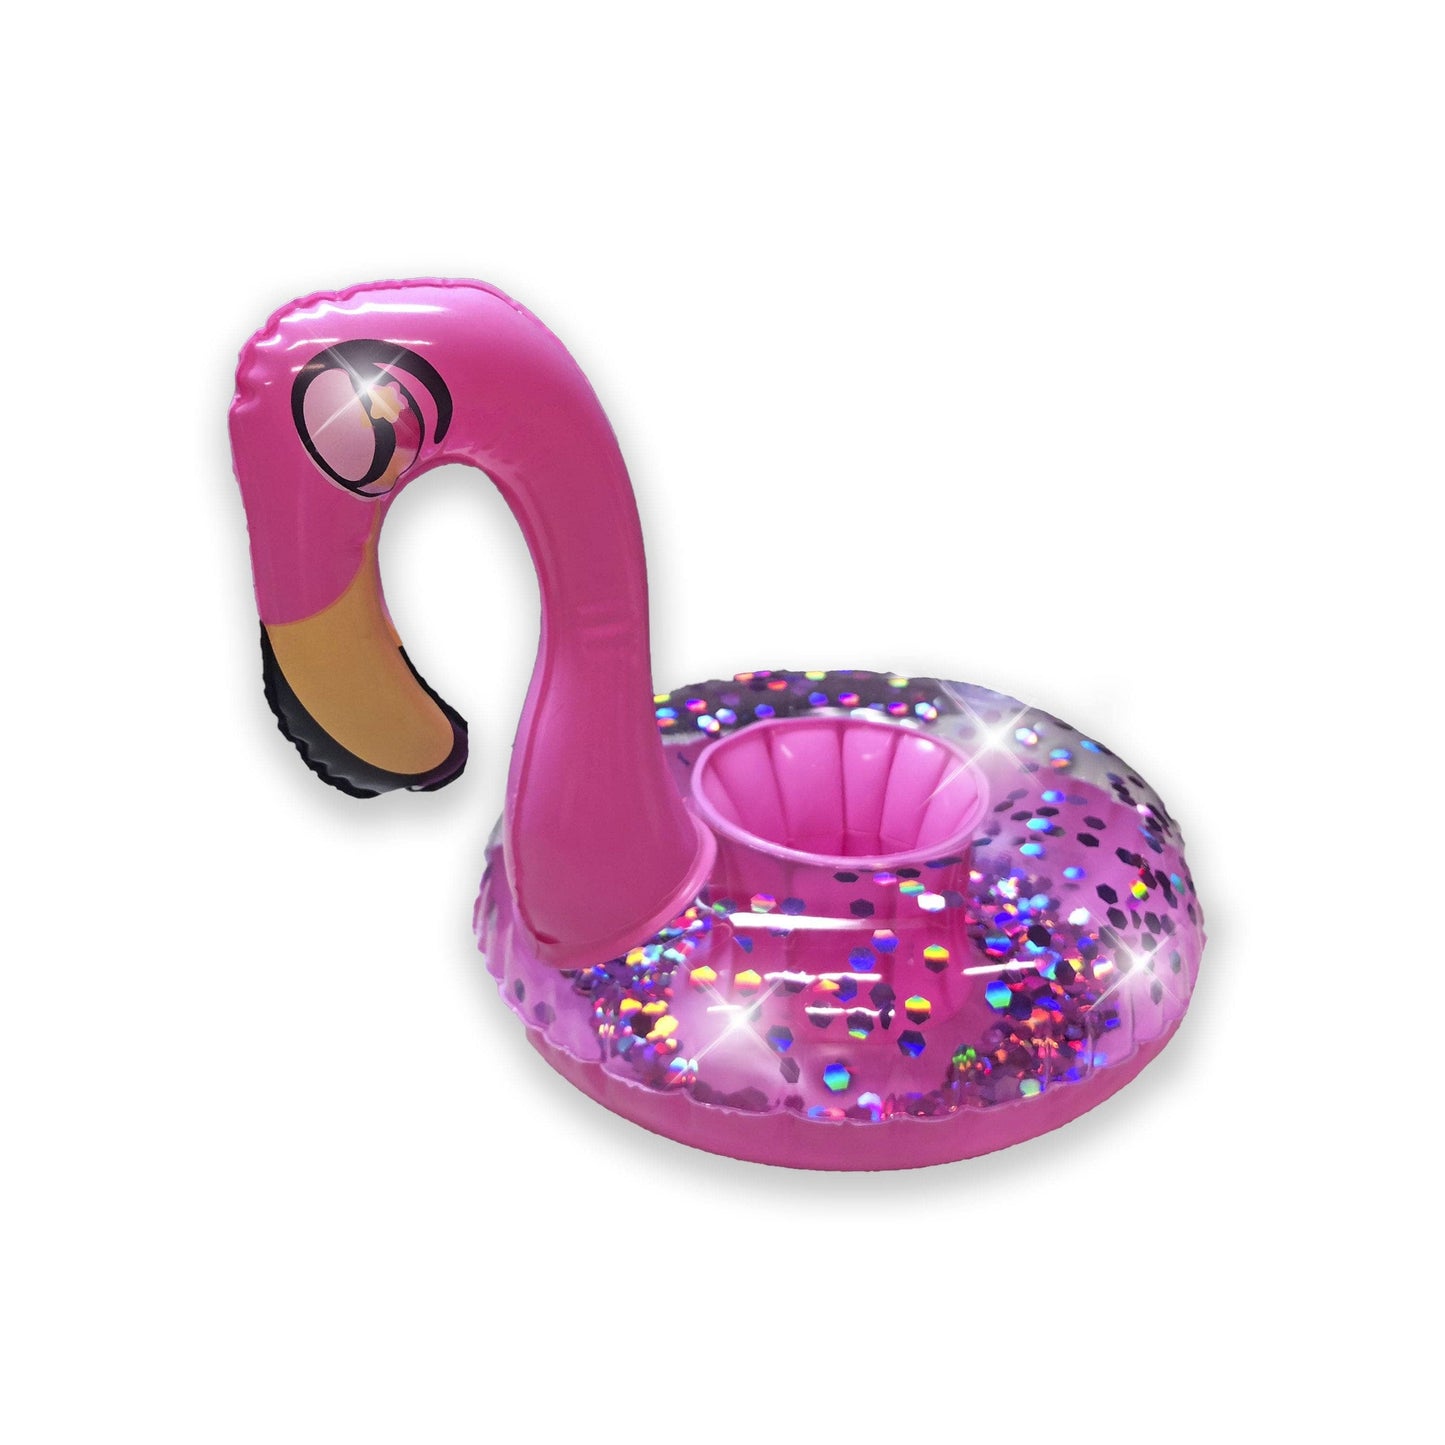 Inflatable Drink Pool Floats two (2) Pink Glitter Flamingo